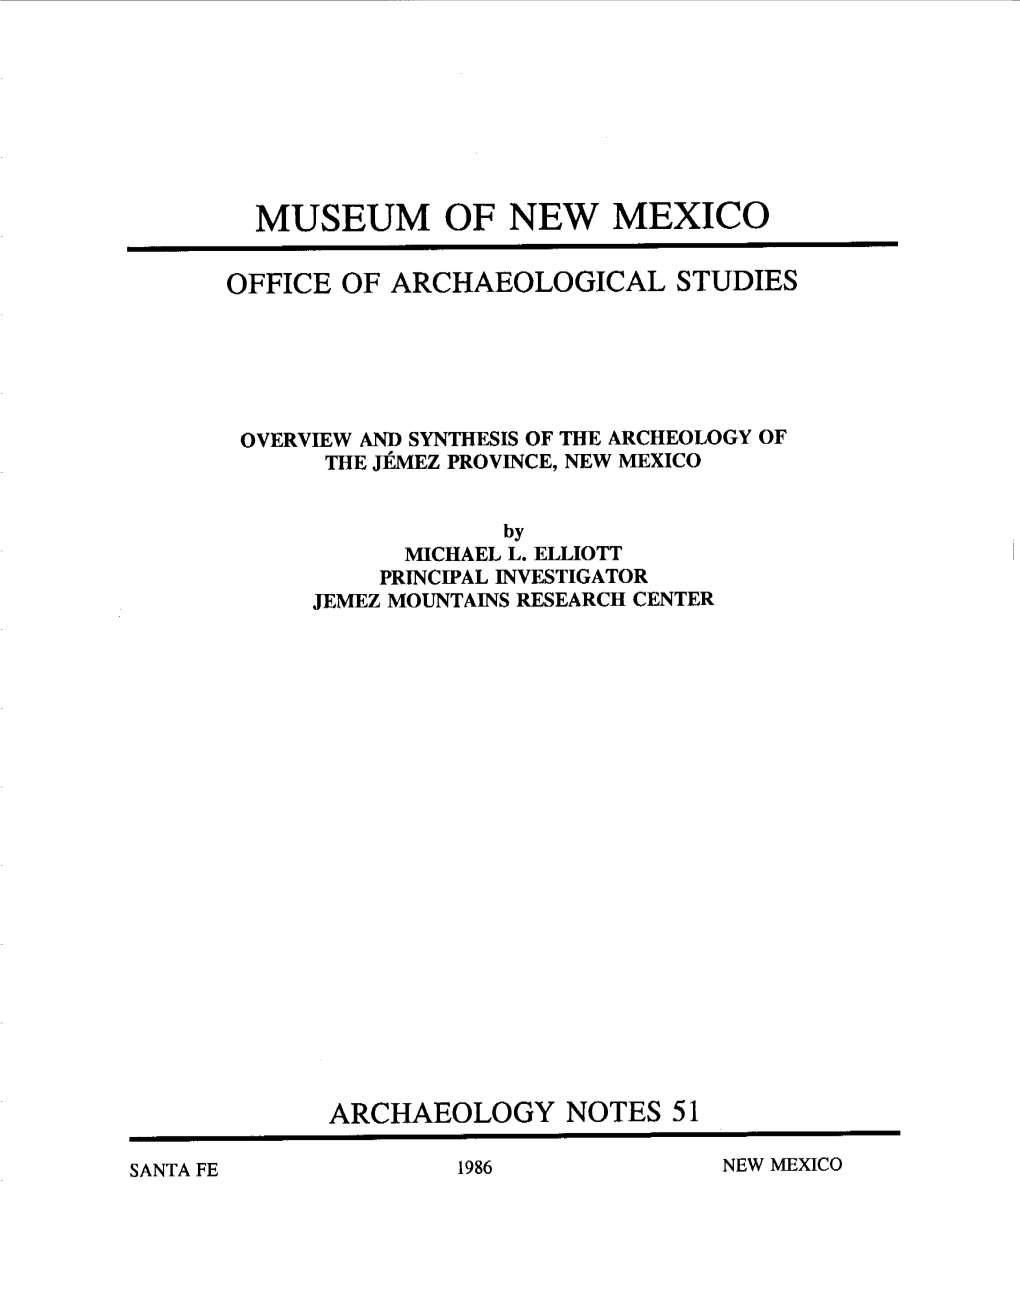 Museum of New Mexico Office of Archaeological Studies